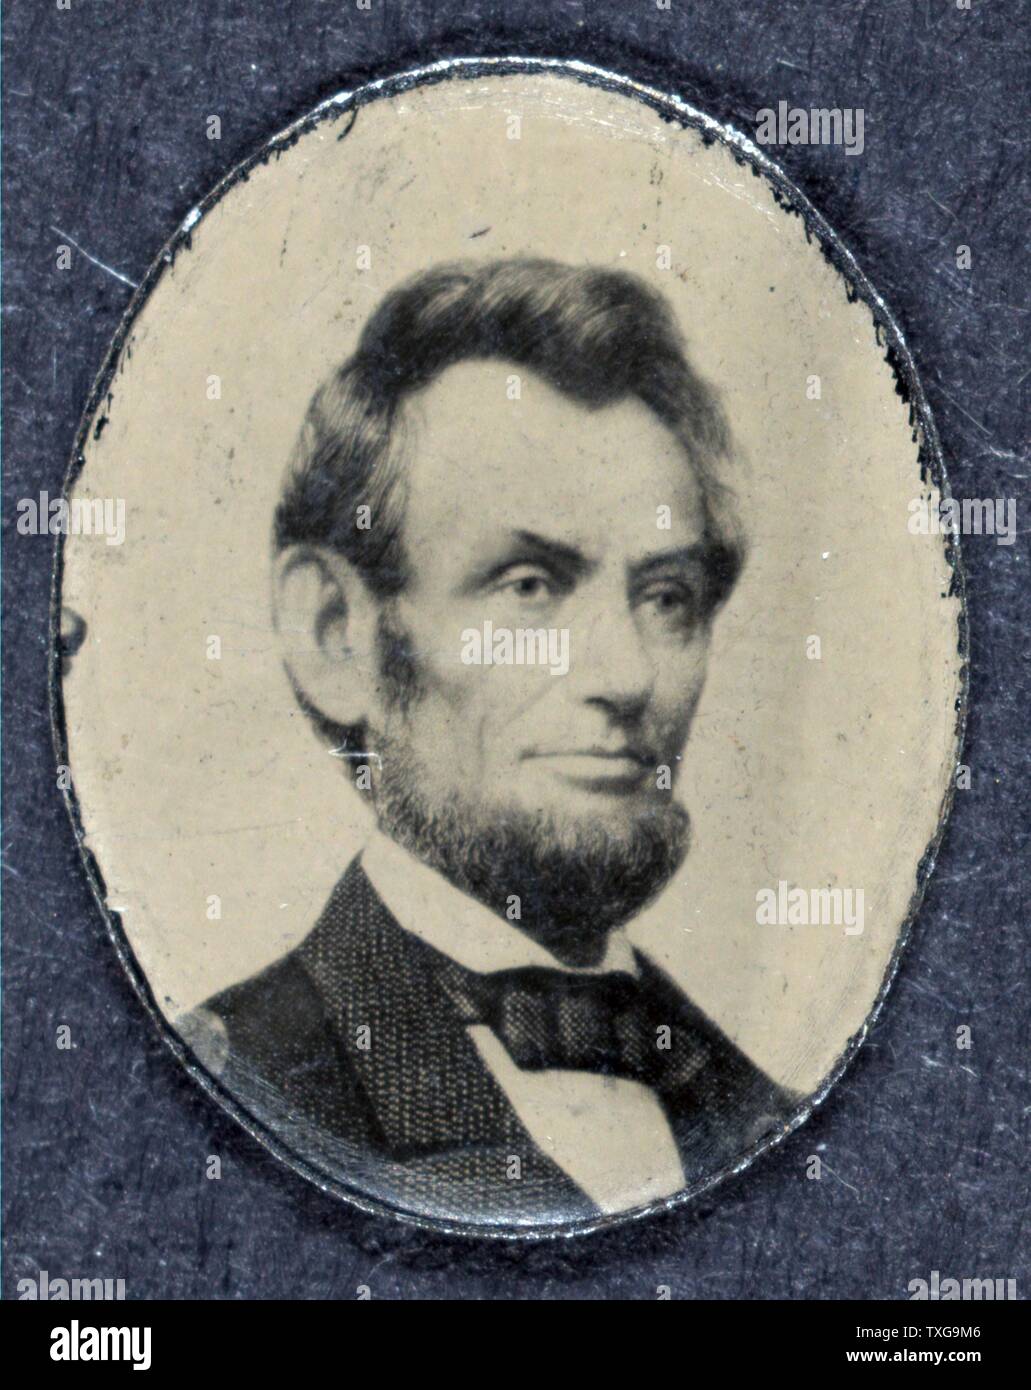 Barady Political campaign button for the 1864 United States Presidential election showing portrait of Abraham Lincoln, facing right - 8 January 1864. Stock Photo